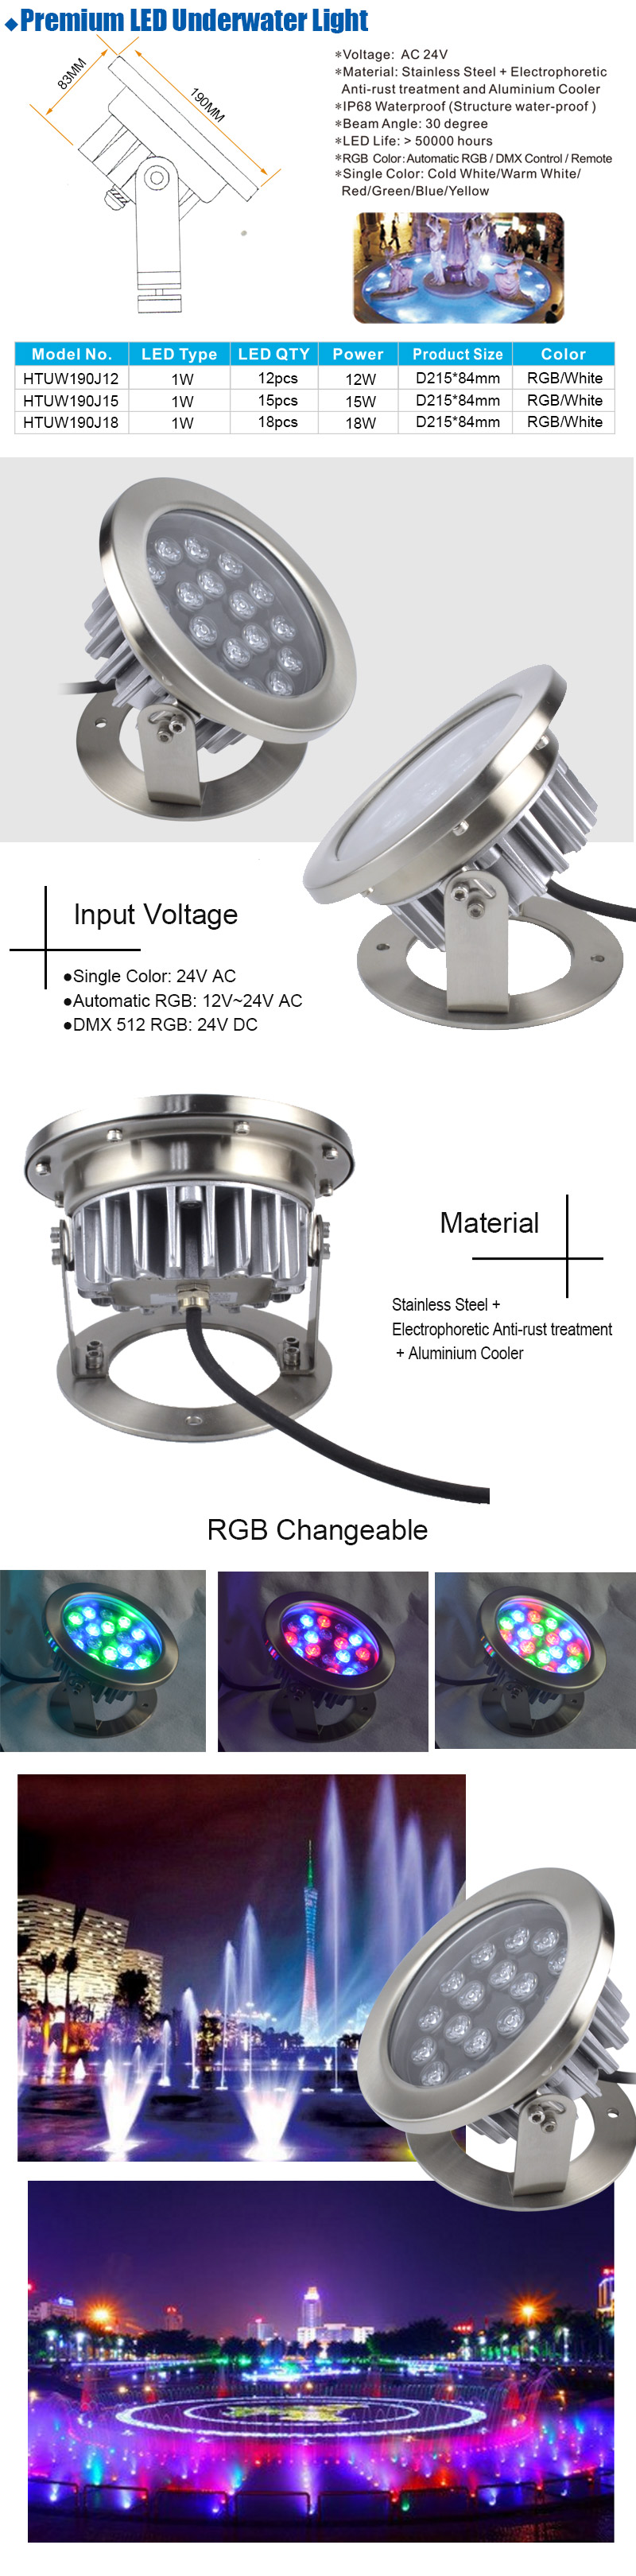 Premium 15W Stainless Steel High Power RGB led underwater light with raditor